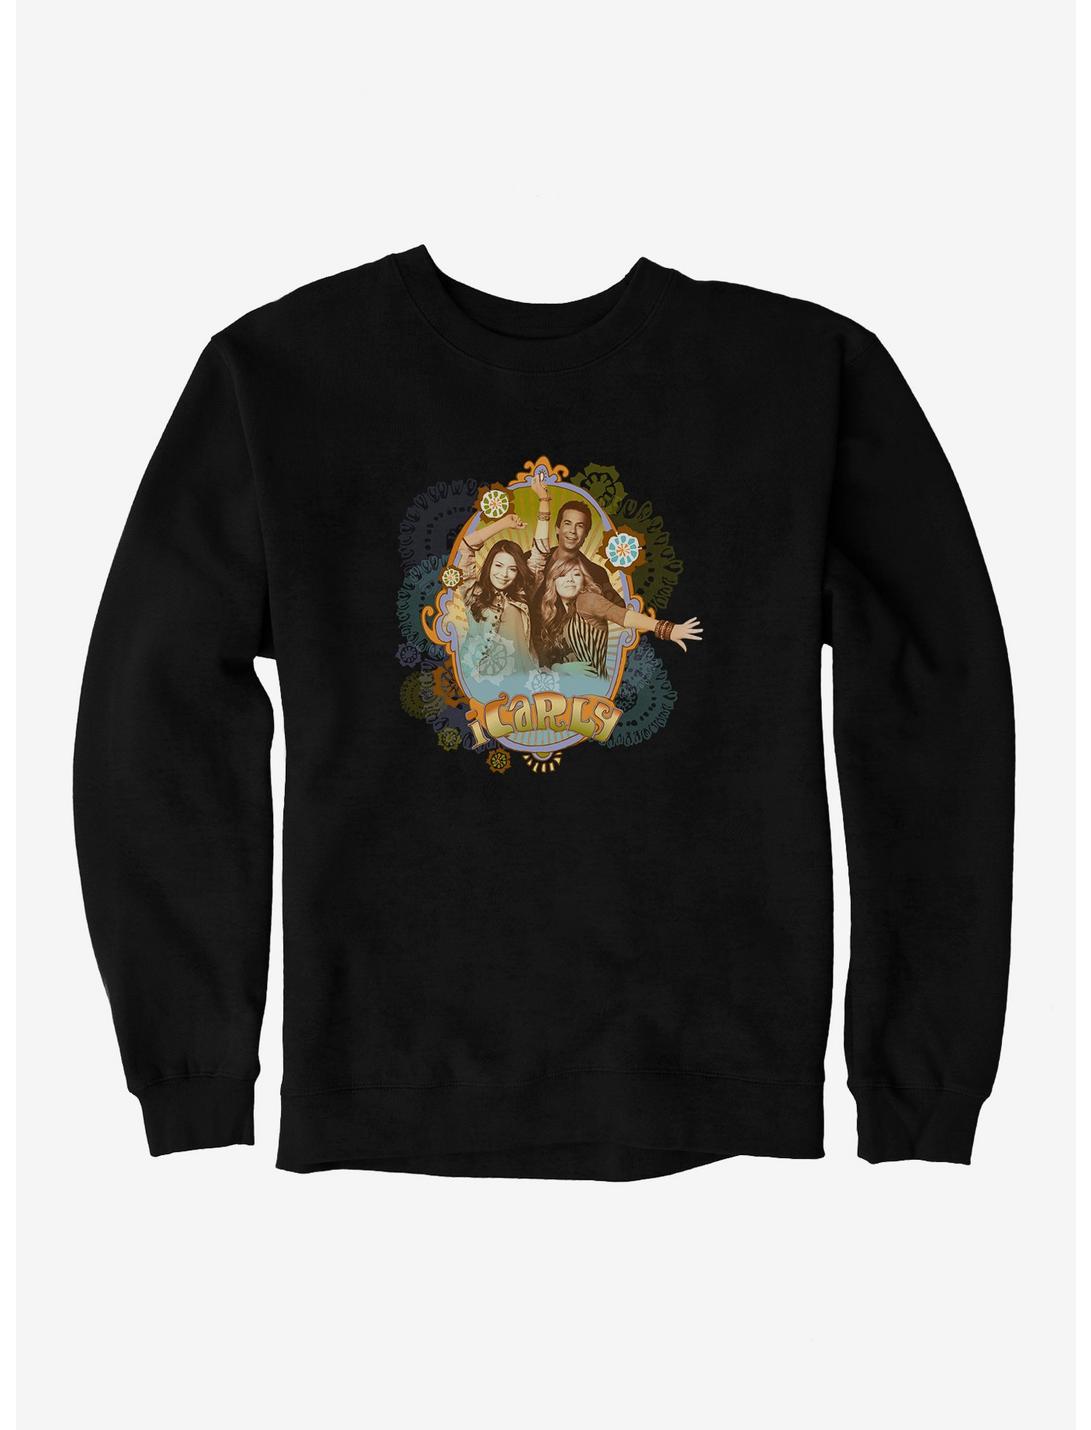 iCarly With Sam And Spencer Summer Sweatshirt, , hi-res